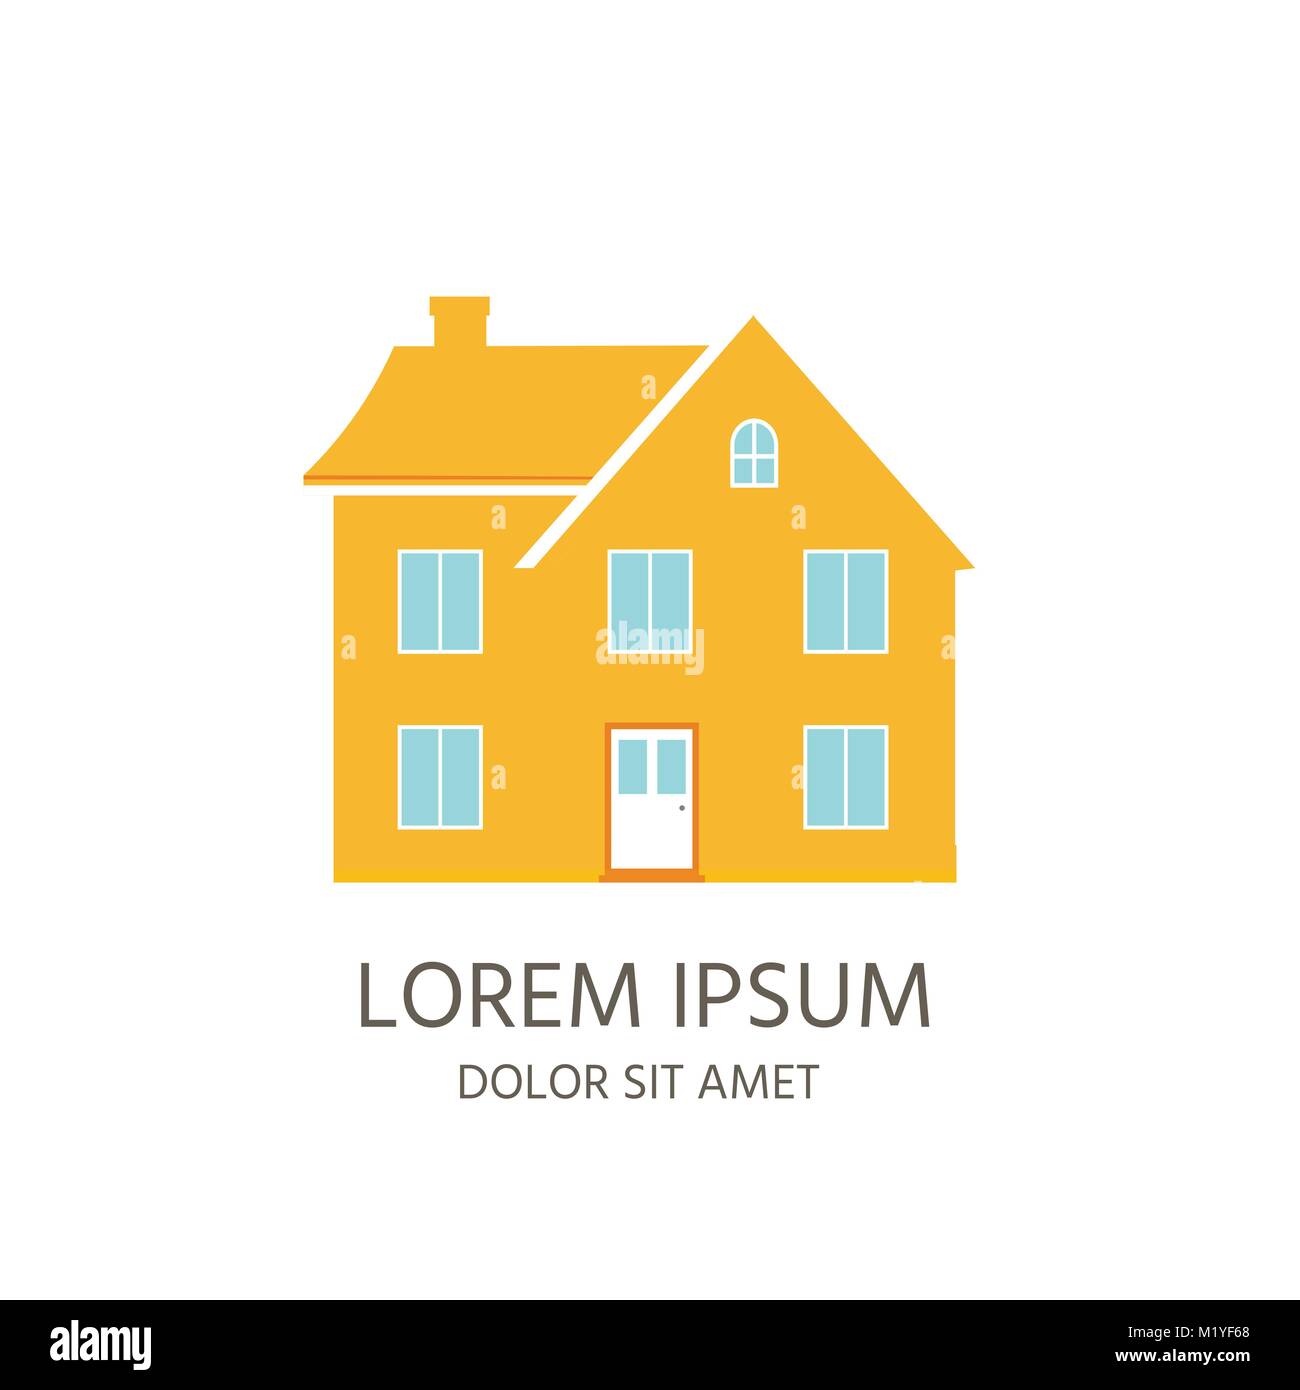 Modern icon with cozy home, house, cottage. Smart building with pastel color.  Flat design urban landscape. Stock Vector